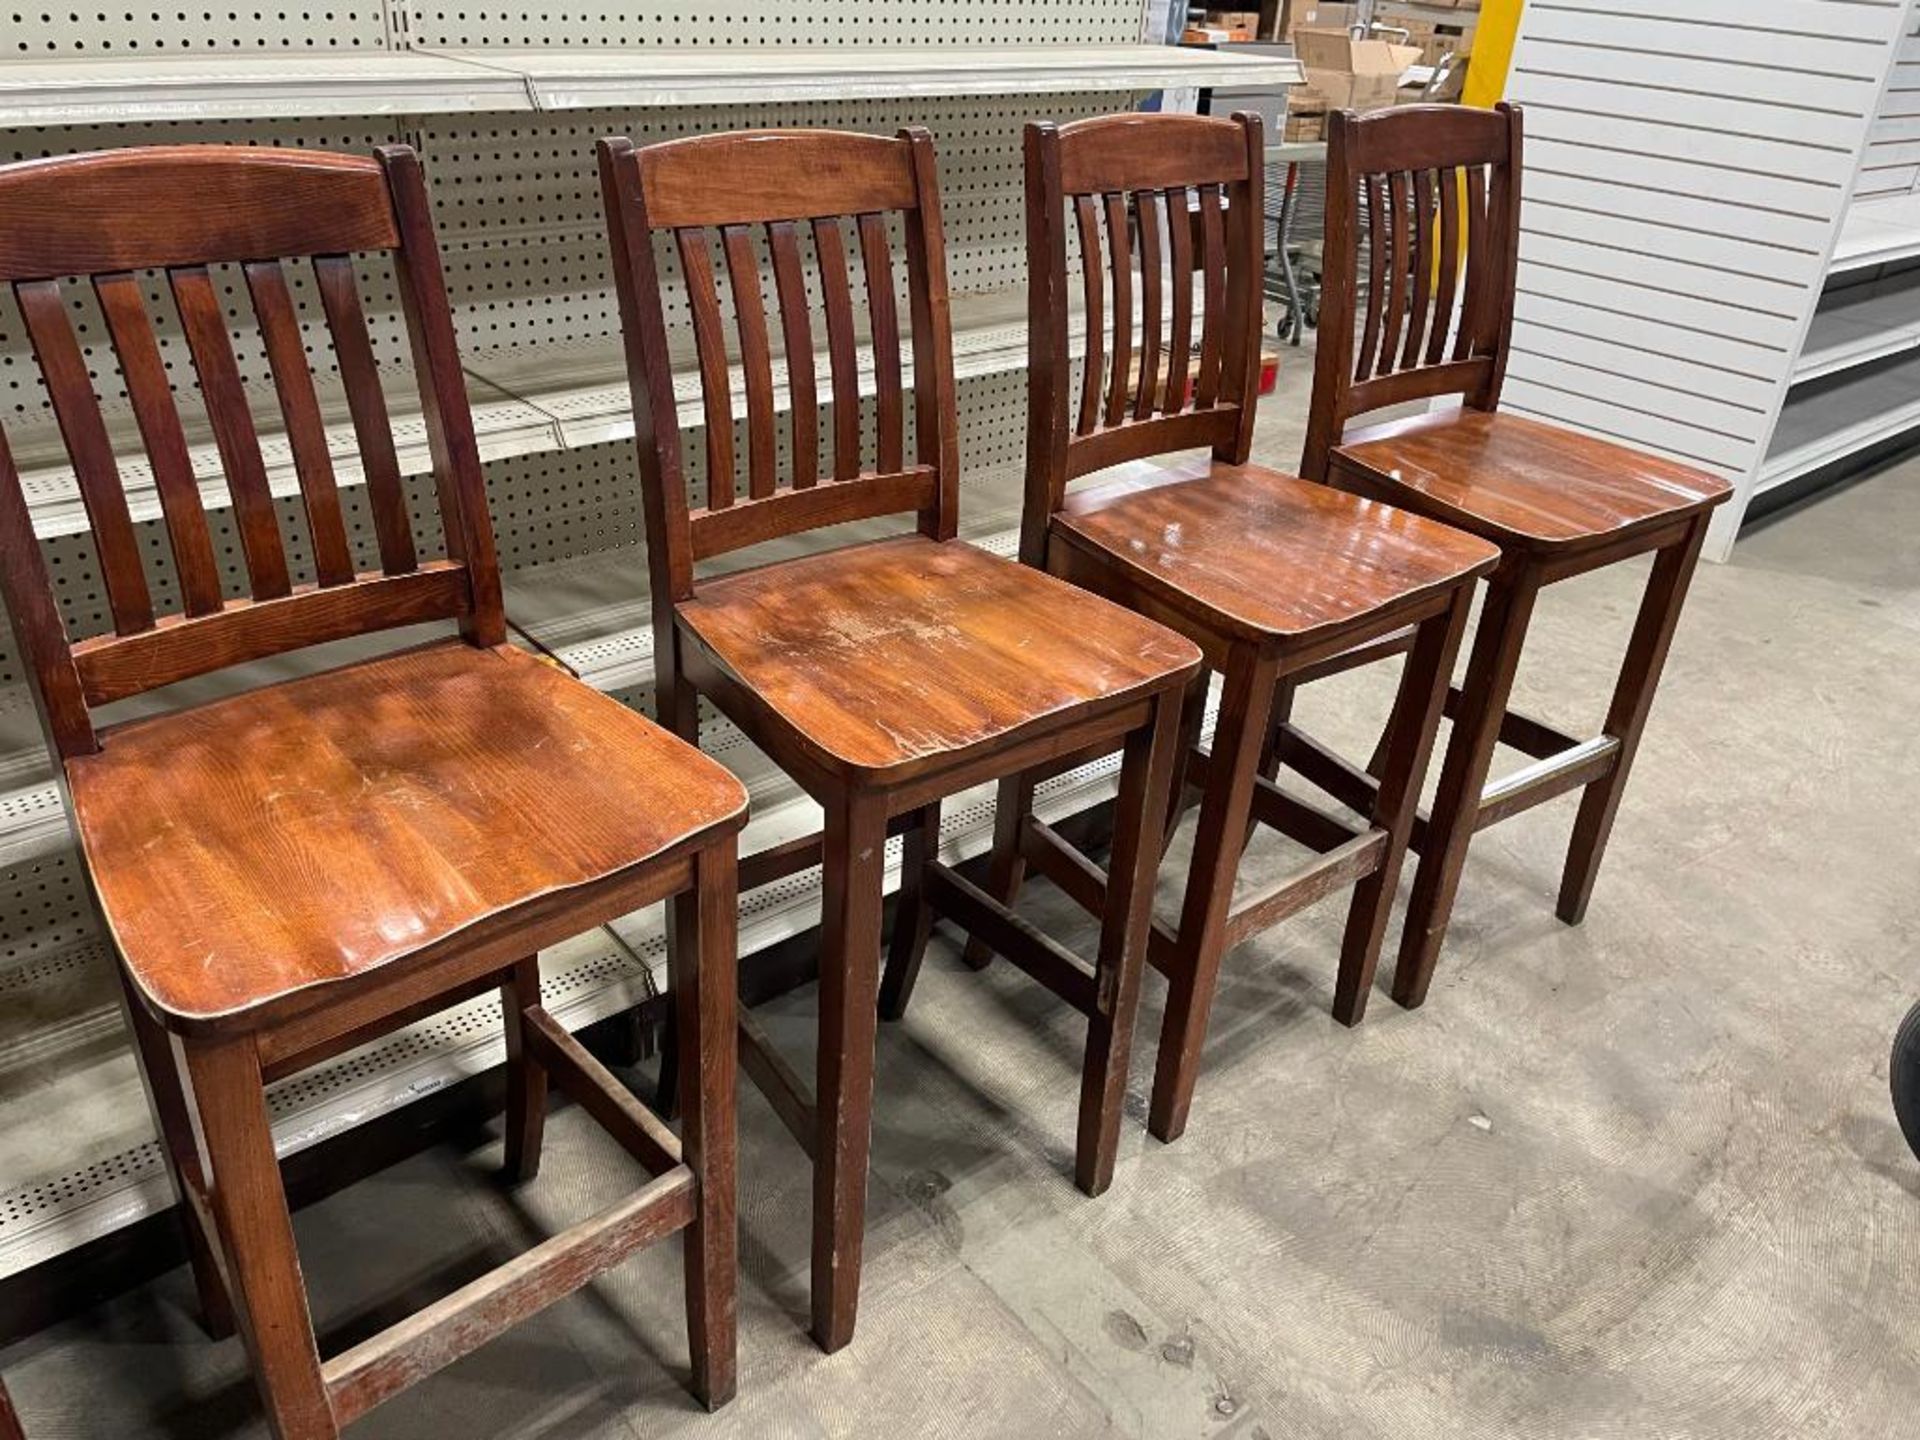 LOT OF (10) SLAT BACK WOOD BAR HEIGHT CHAIRS - Image 4 of 8